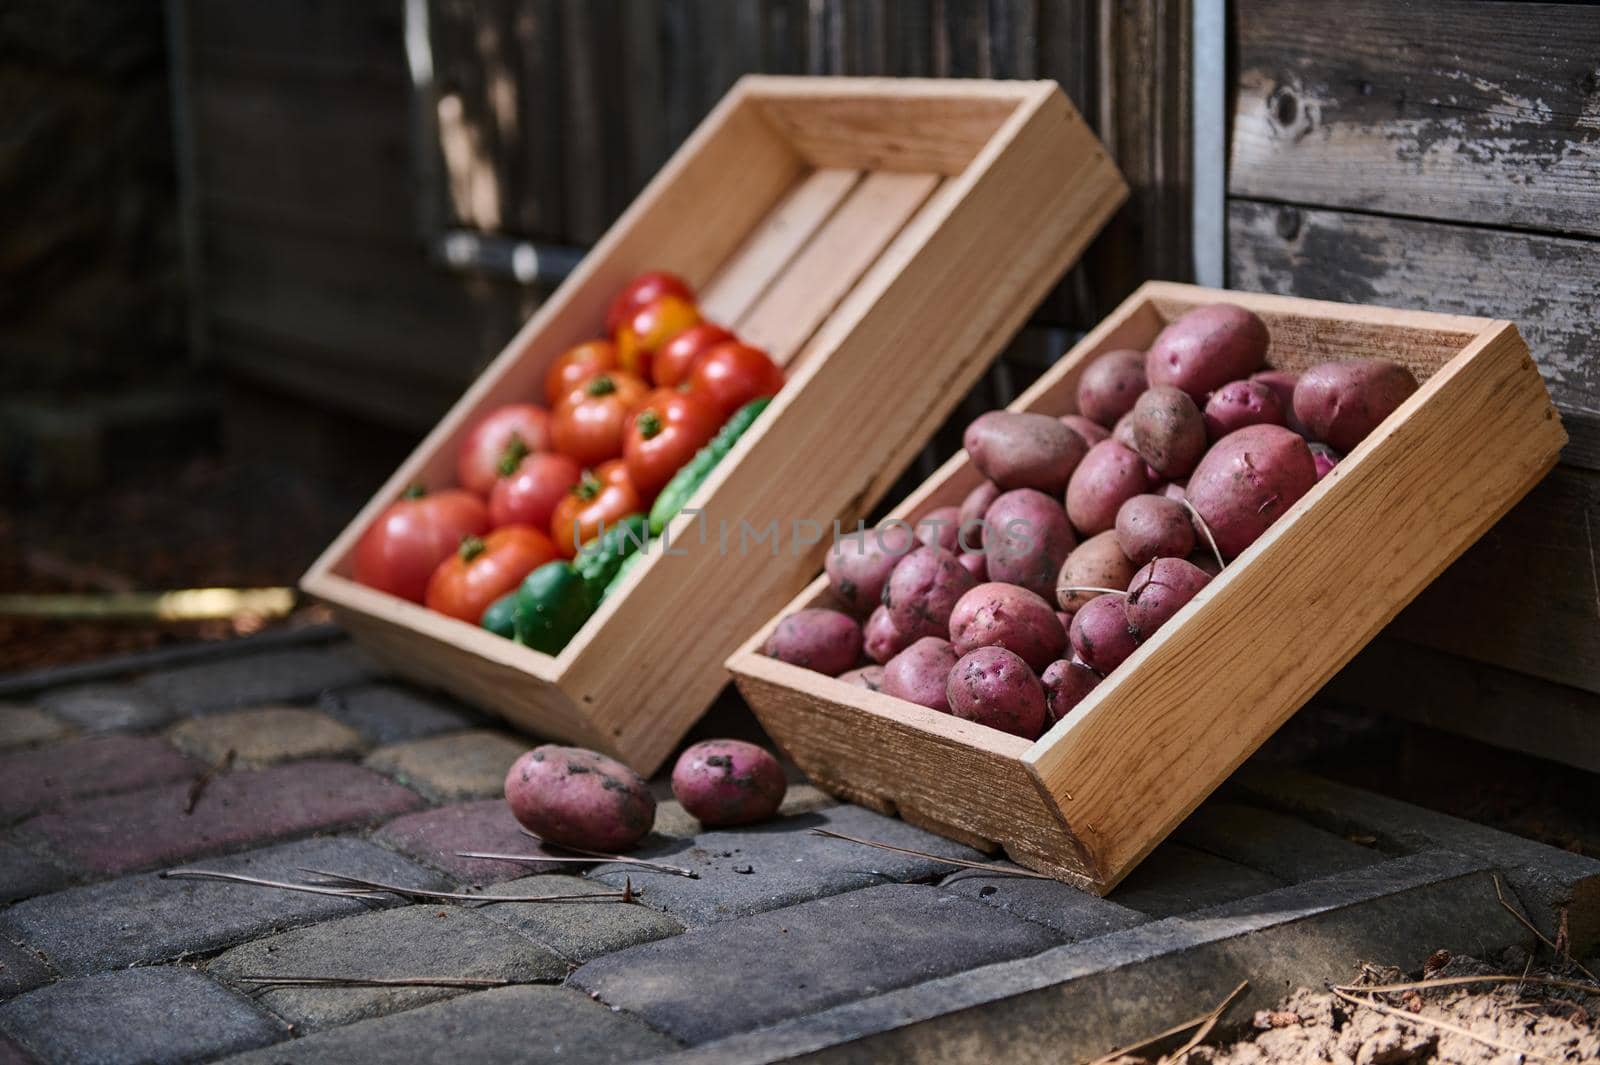 Close-up. Wooden crate with freshly dug pink potatoes and blurred box with harvested crop of tomatoes and cucumbers, on a rustic background. Cultivating organic vegetables for sale in farmers markets